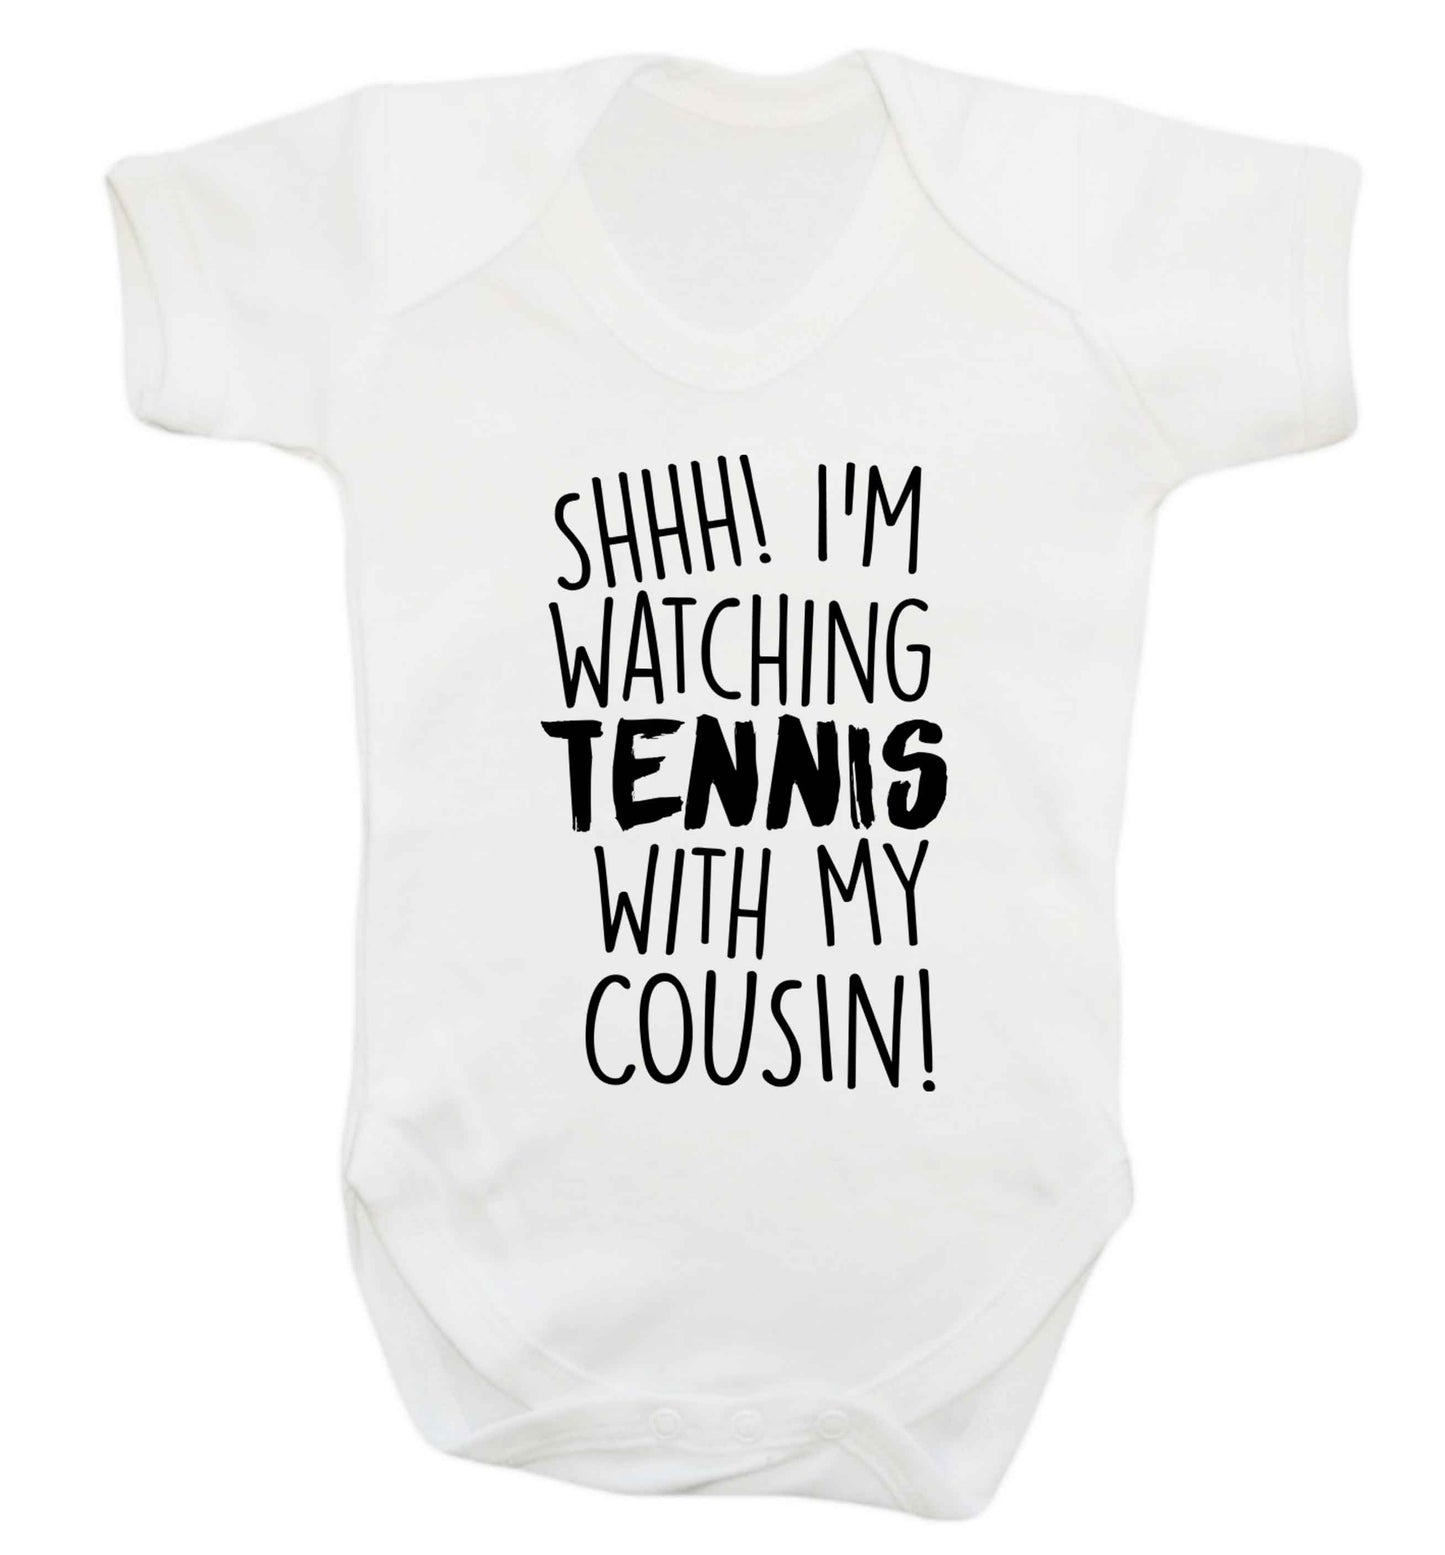 Shh! I'm watching tennis with my cousin! Baby Vest white 18-24 months